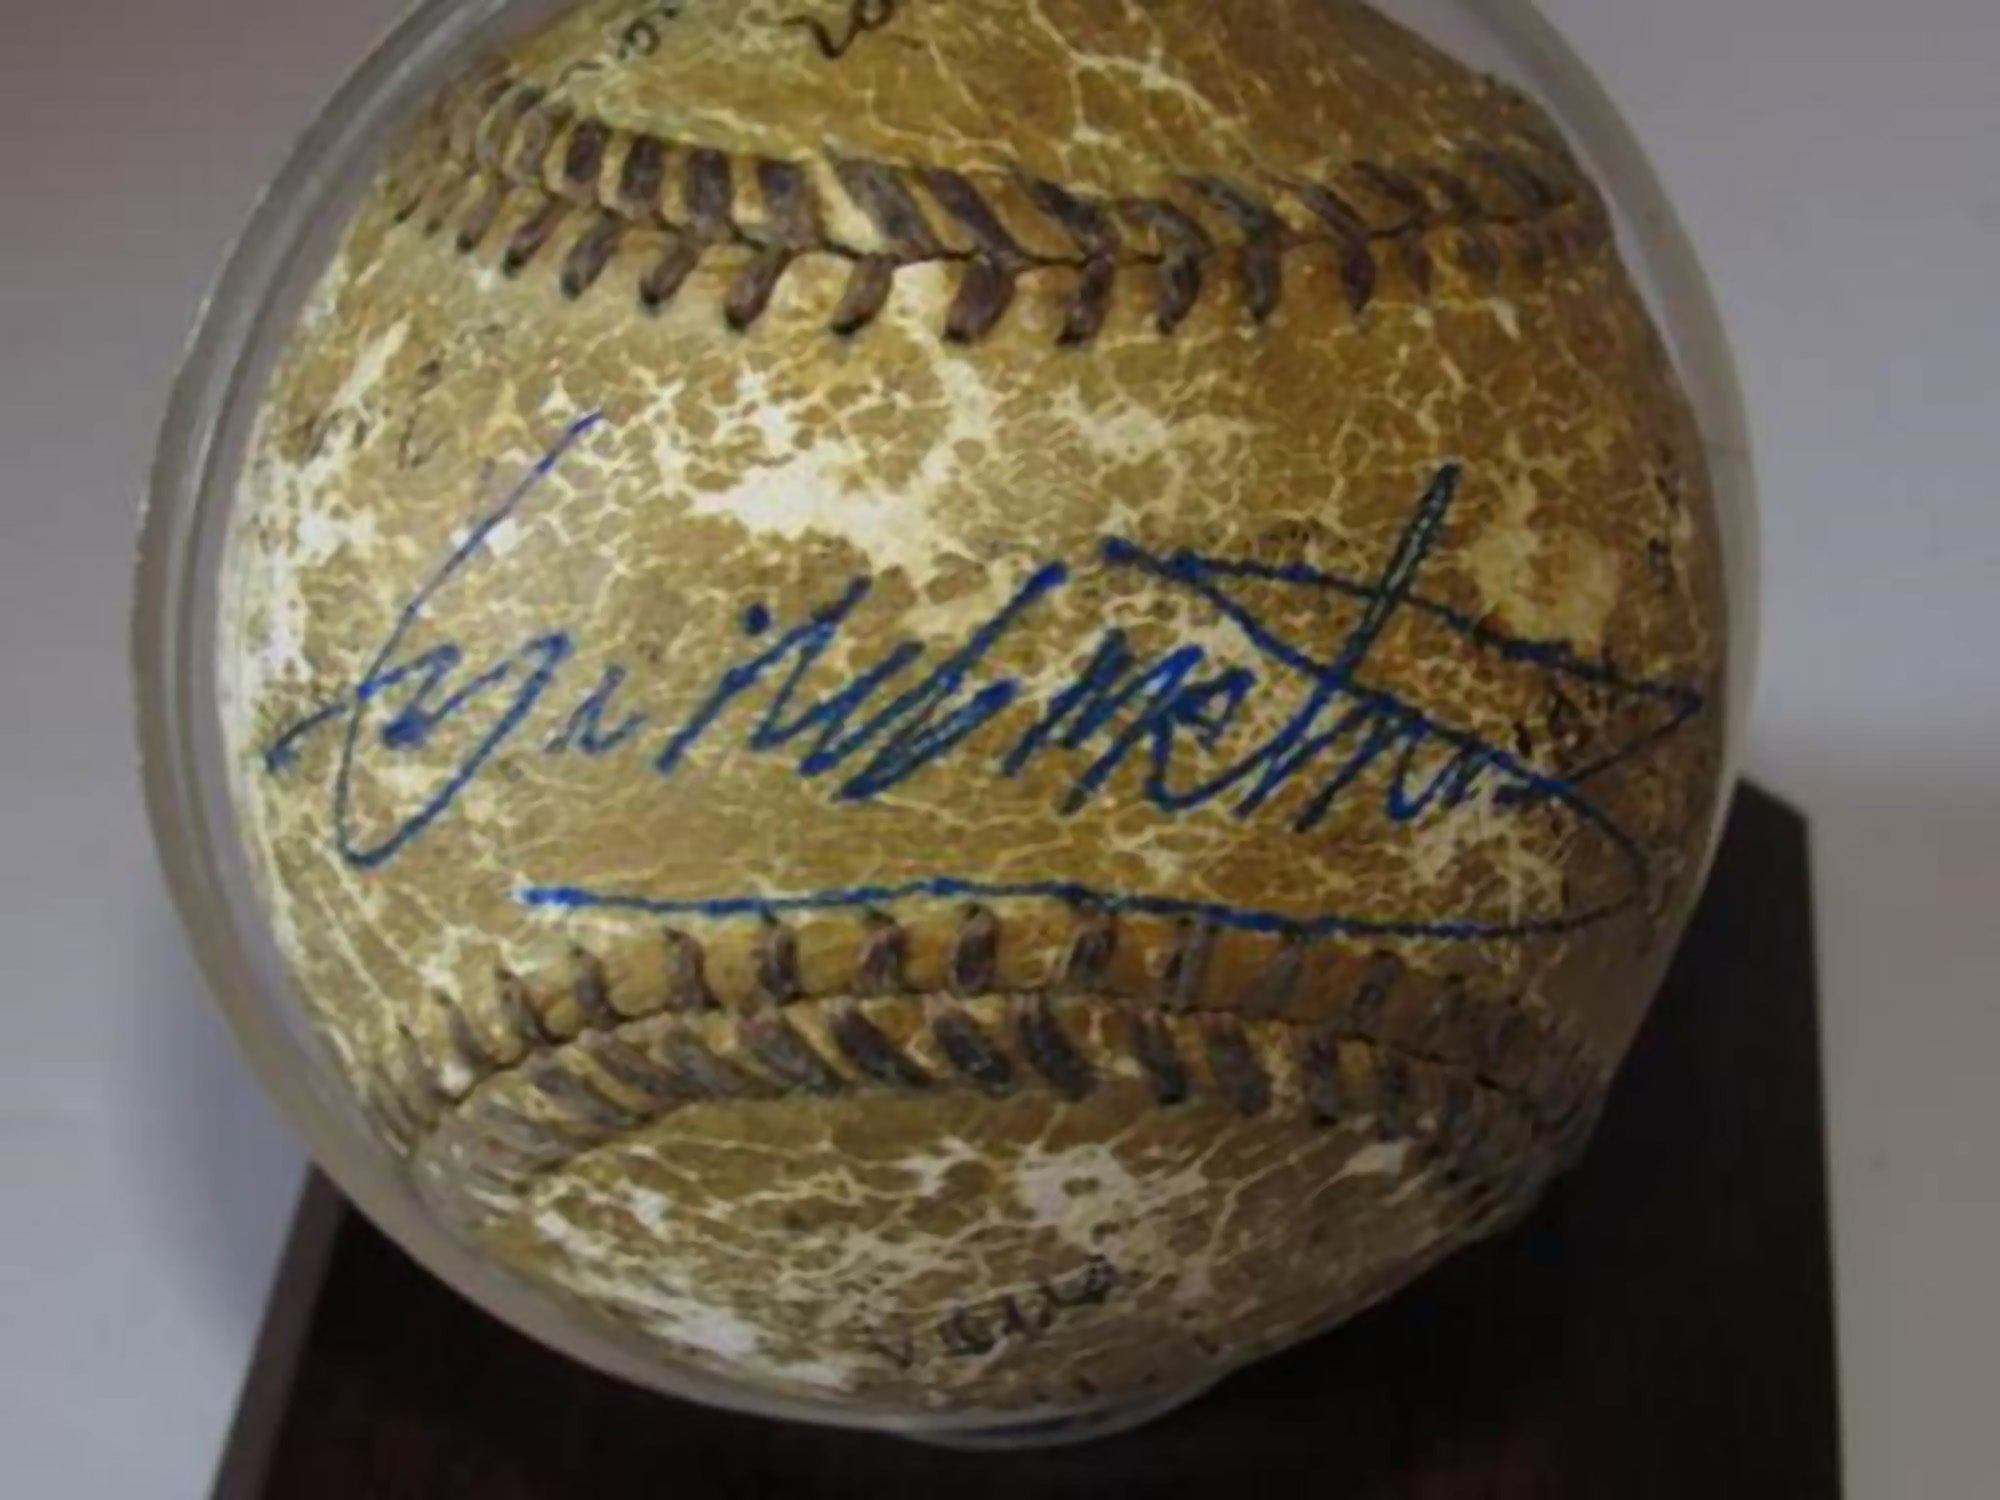 Fidel Castro signed baseball with proof